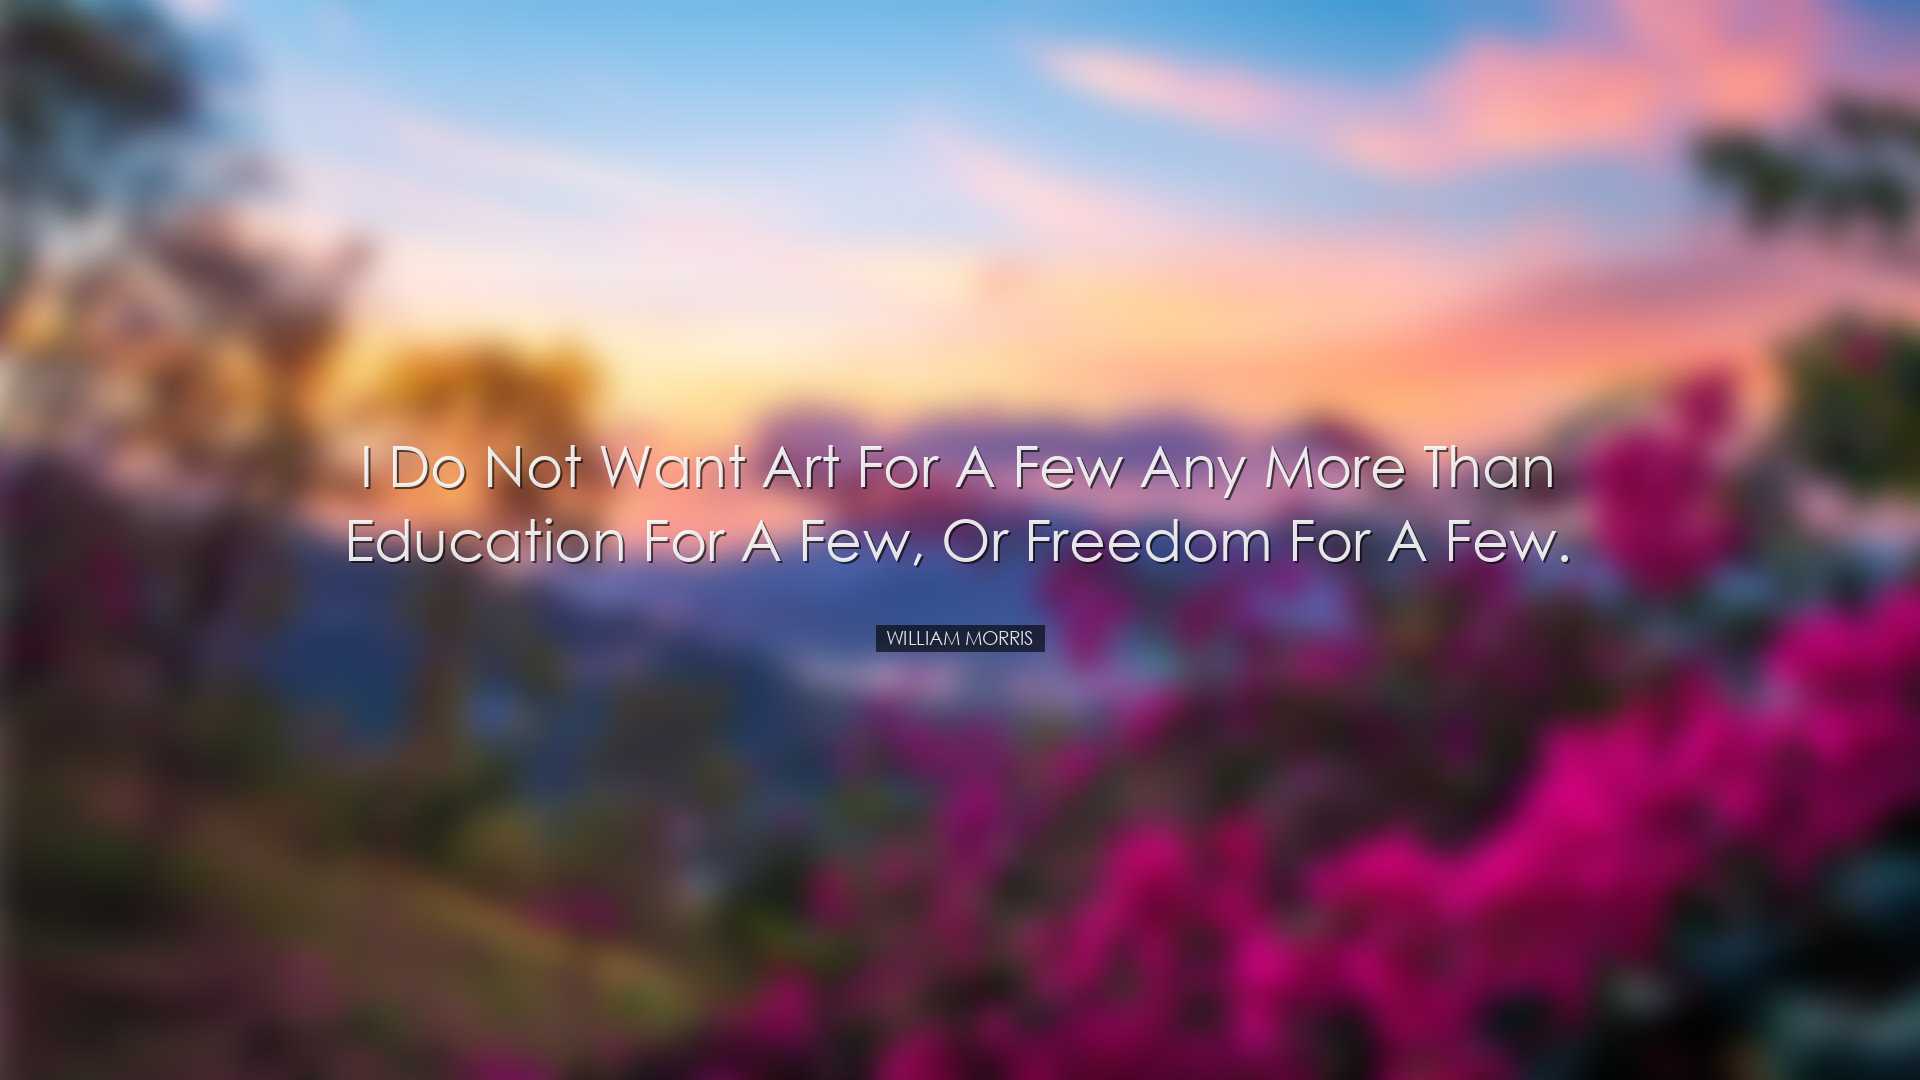 I do not want art for a few any more than education for a few, or